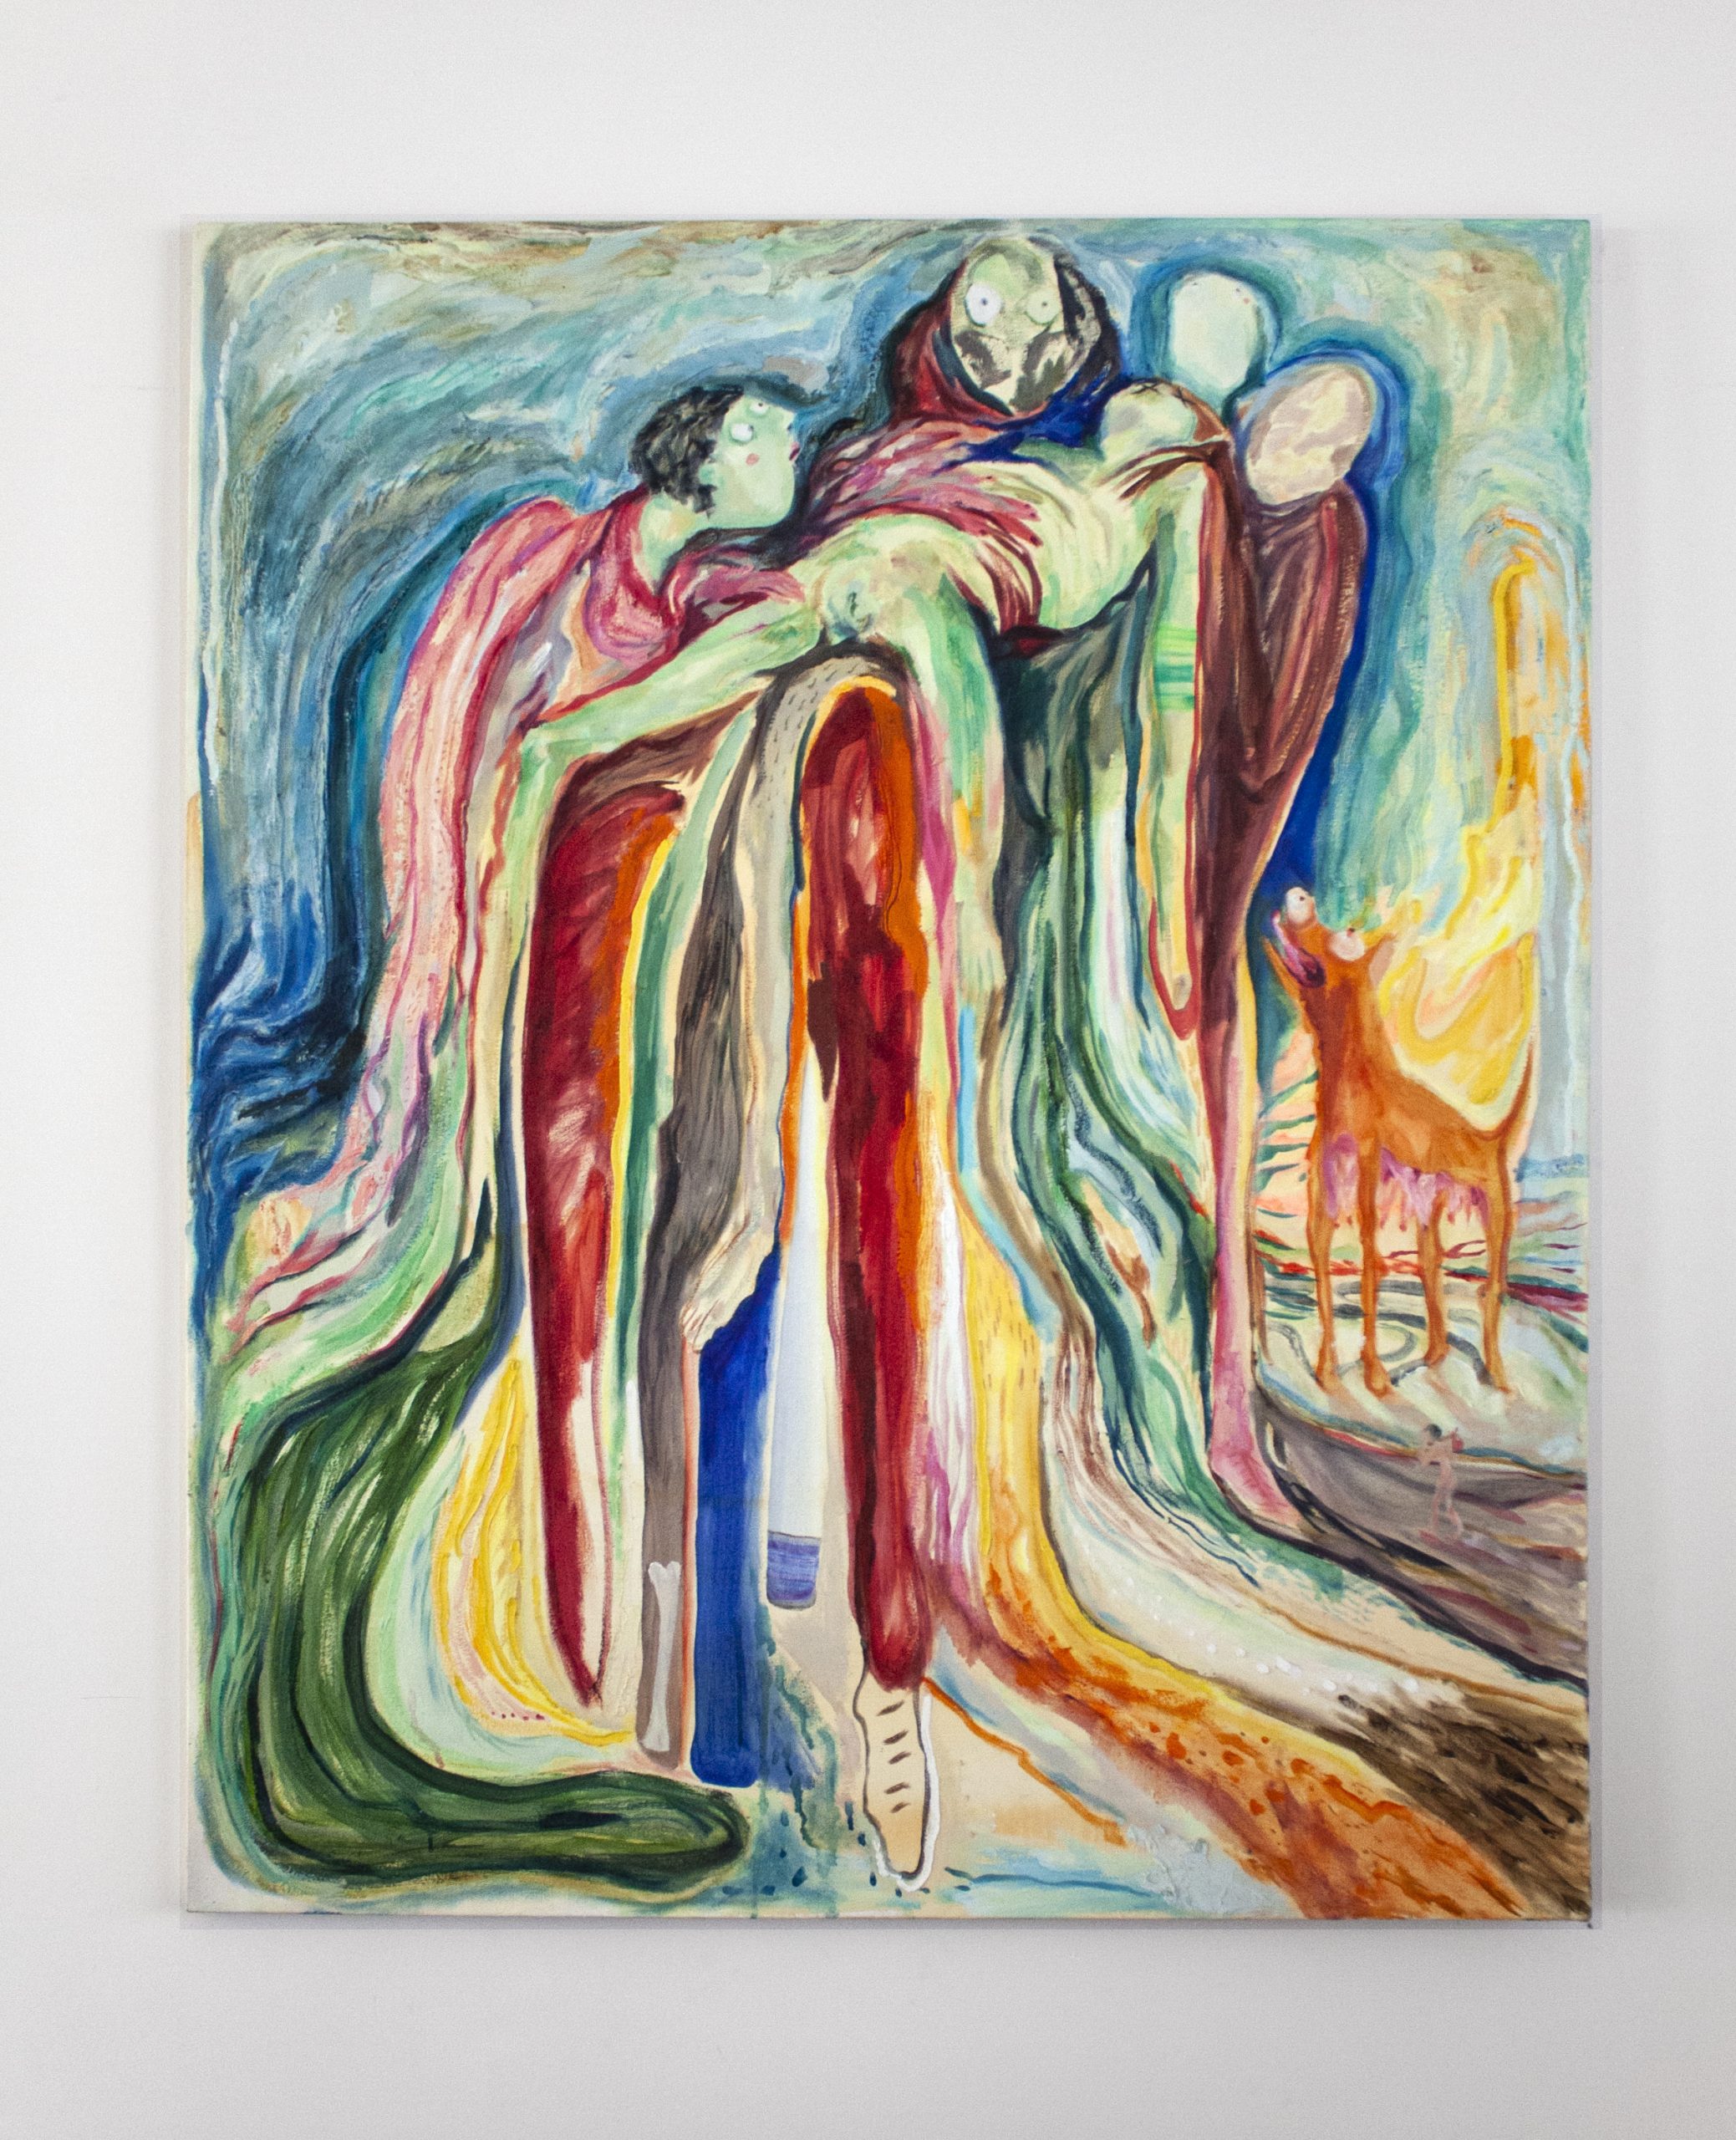 Painting of four abstract figures holding a female corpse, with a dog, against a melting sky